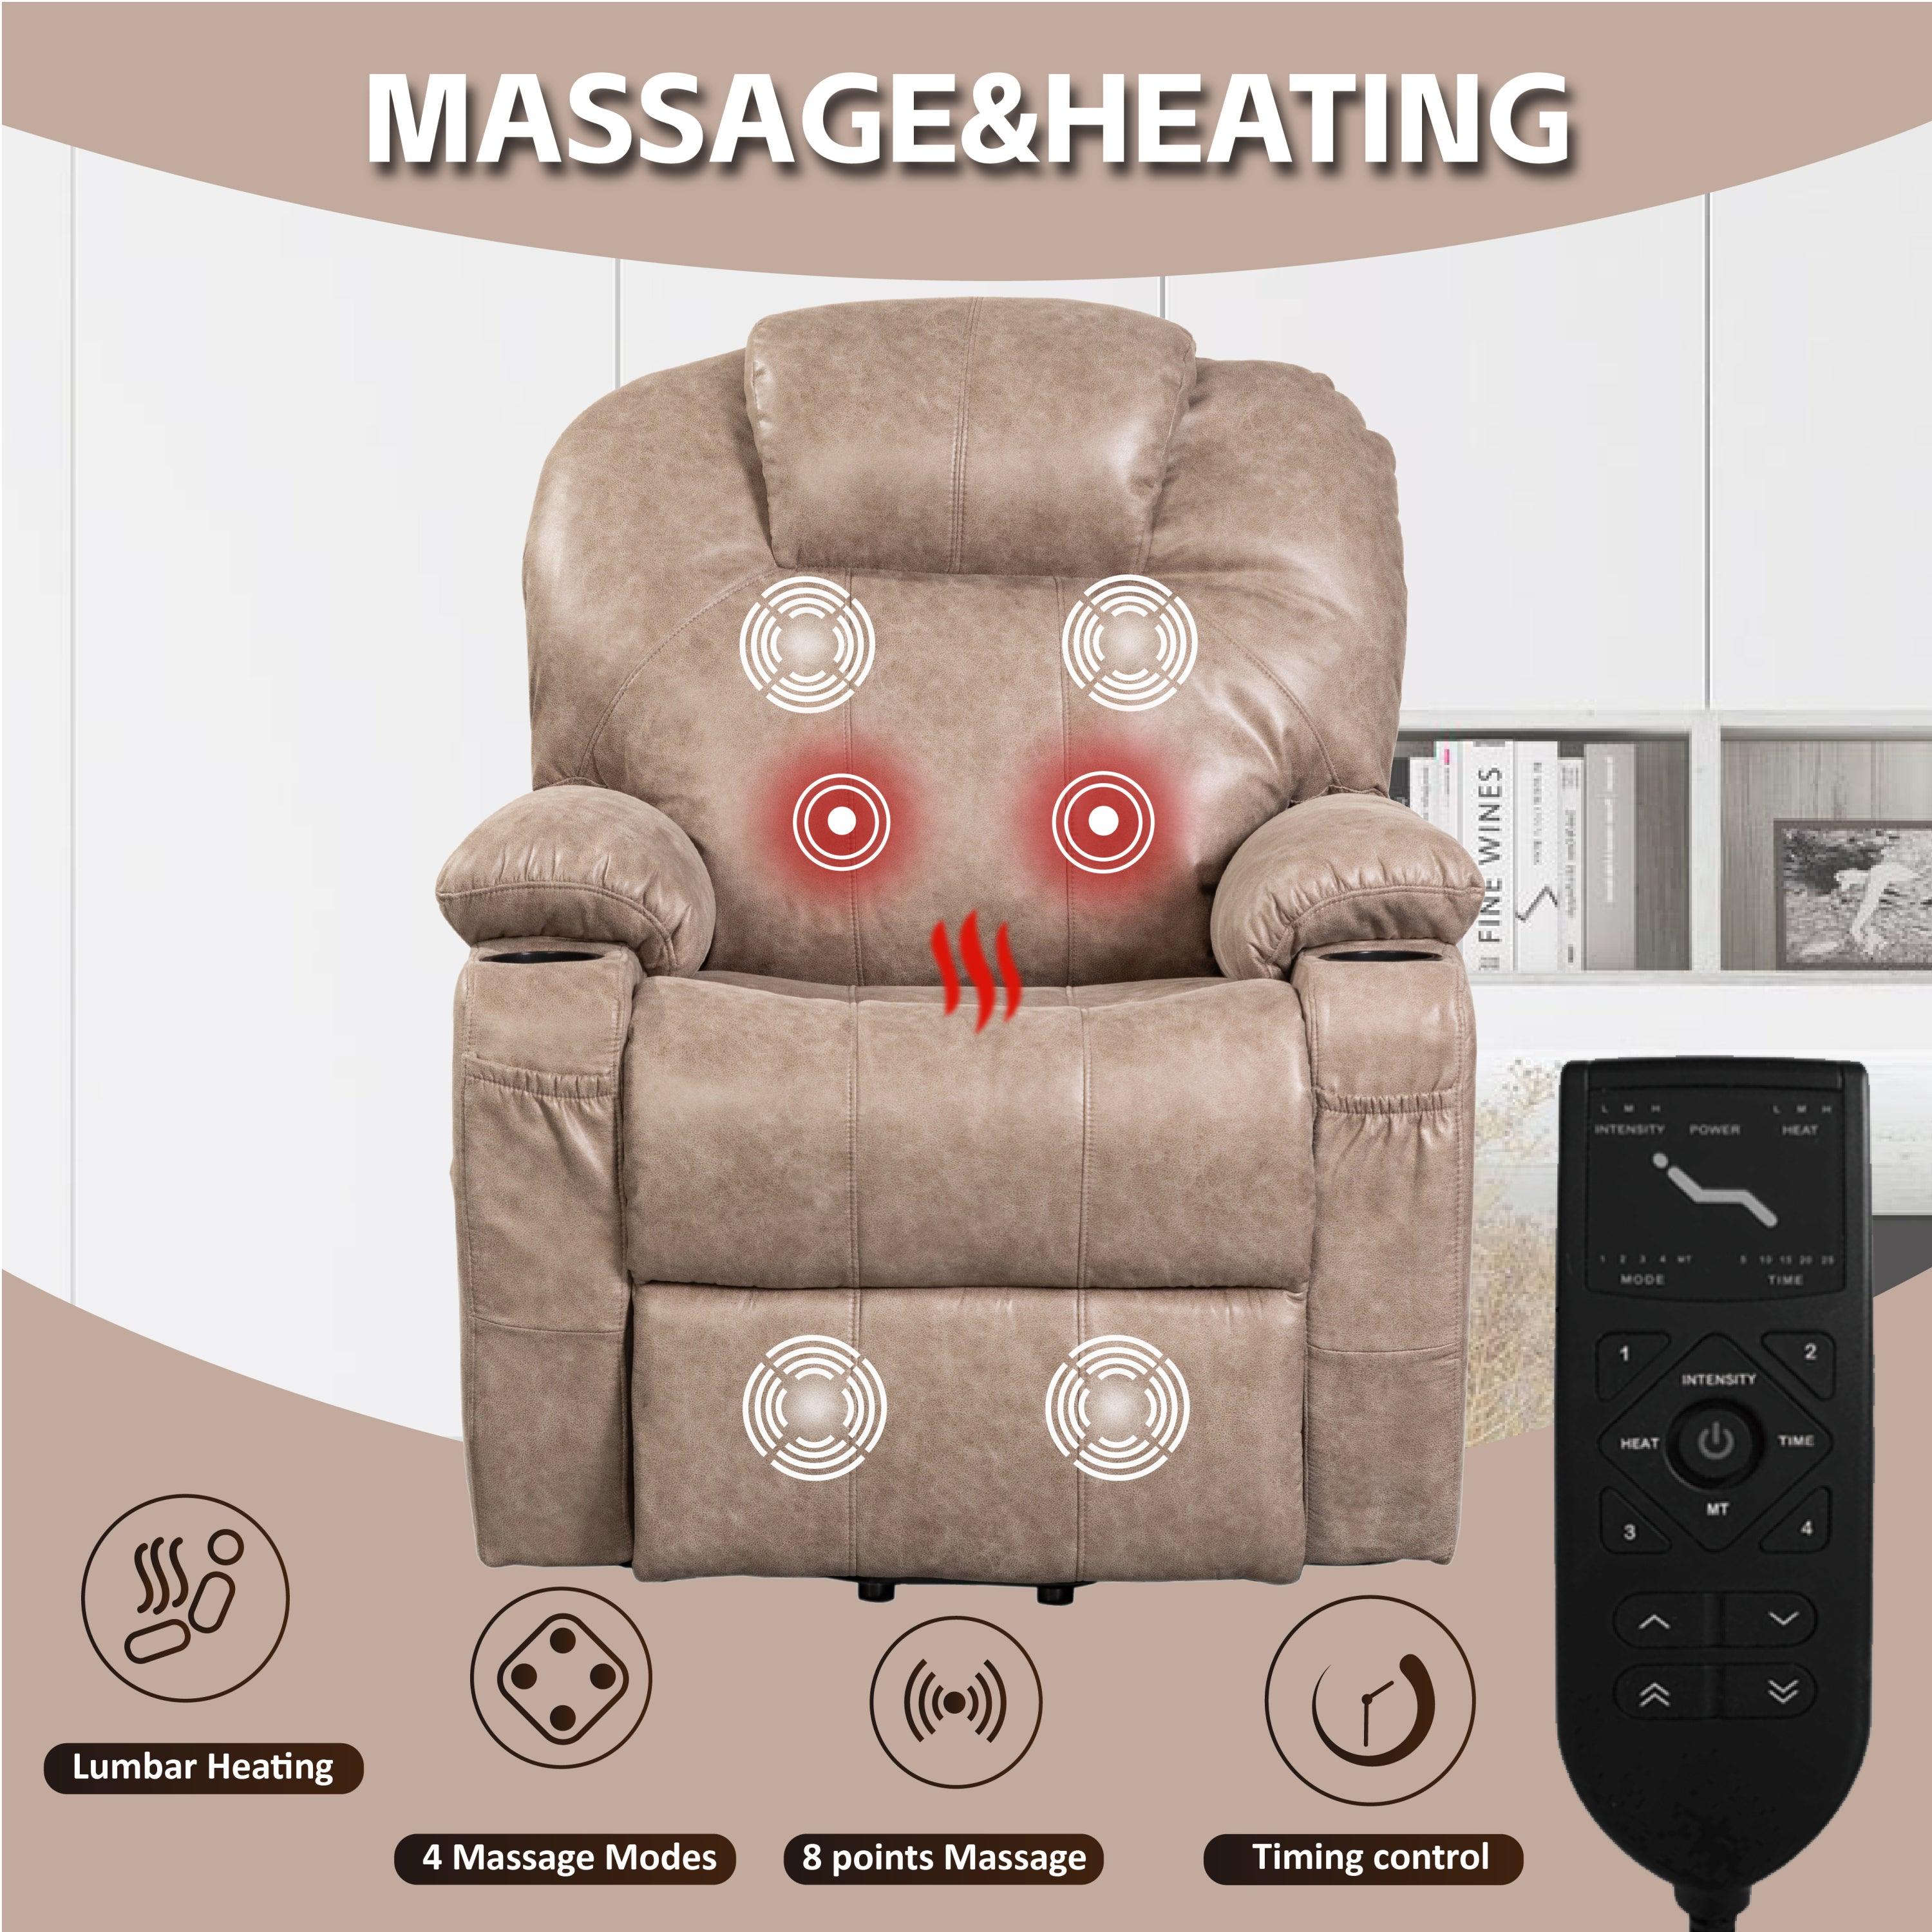 Beige Lift Chair Recliner with massage and heat points